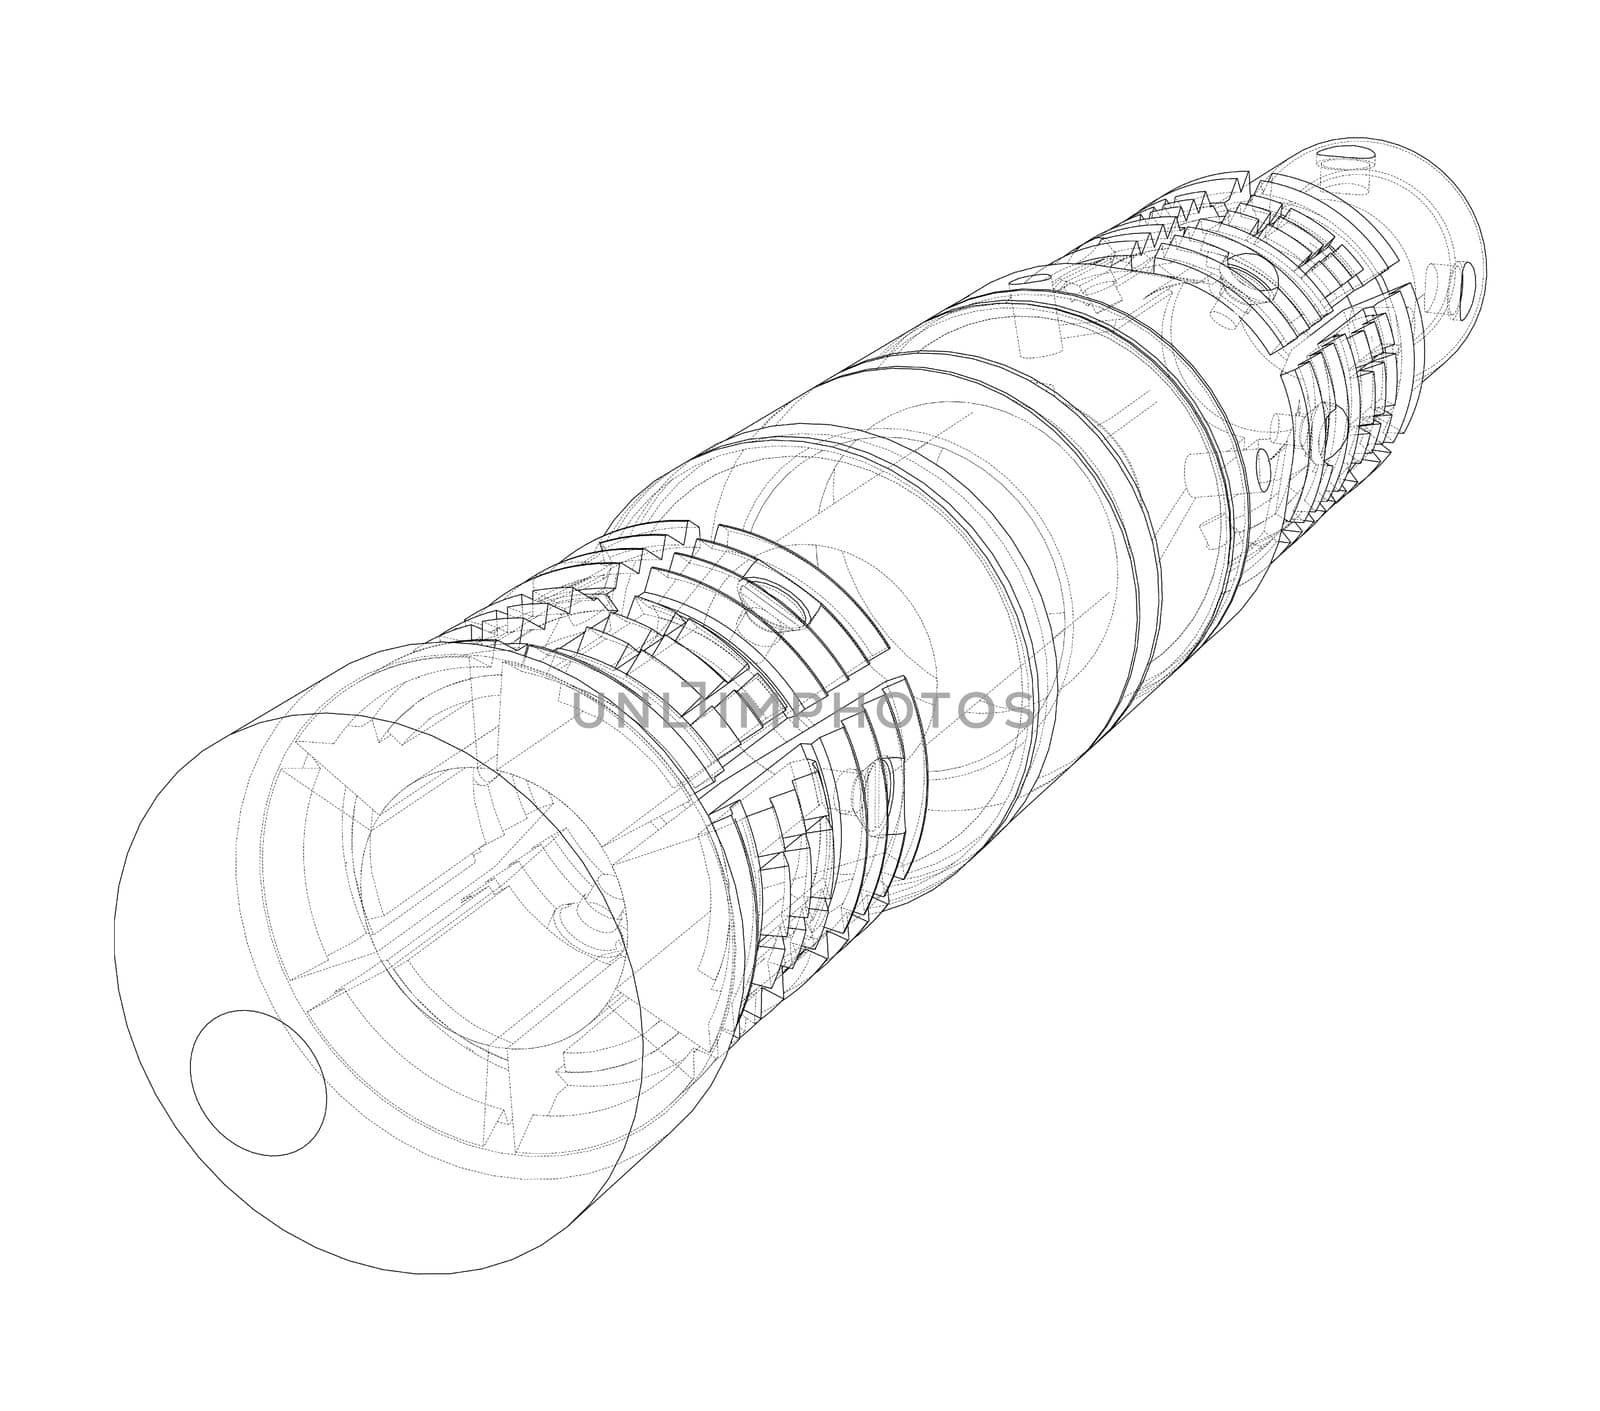 Abstract industrial equipment. Outline drawing or sketch of a cylindrical mechanical device. The concept of industry. 3d illustration